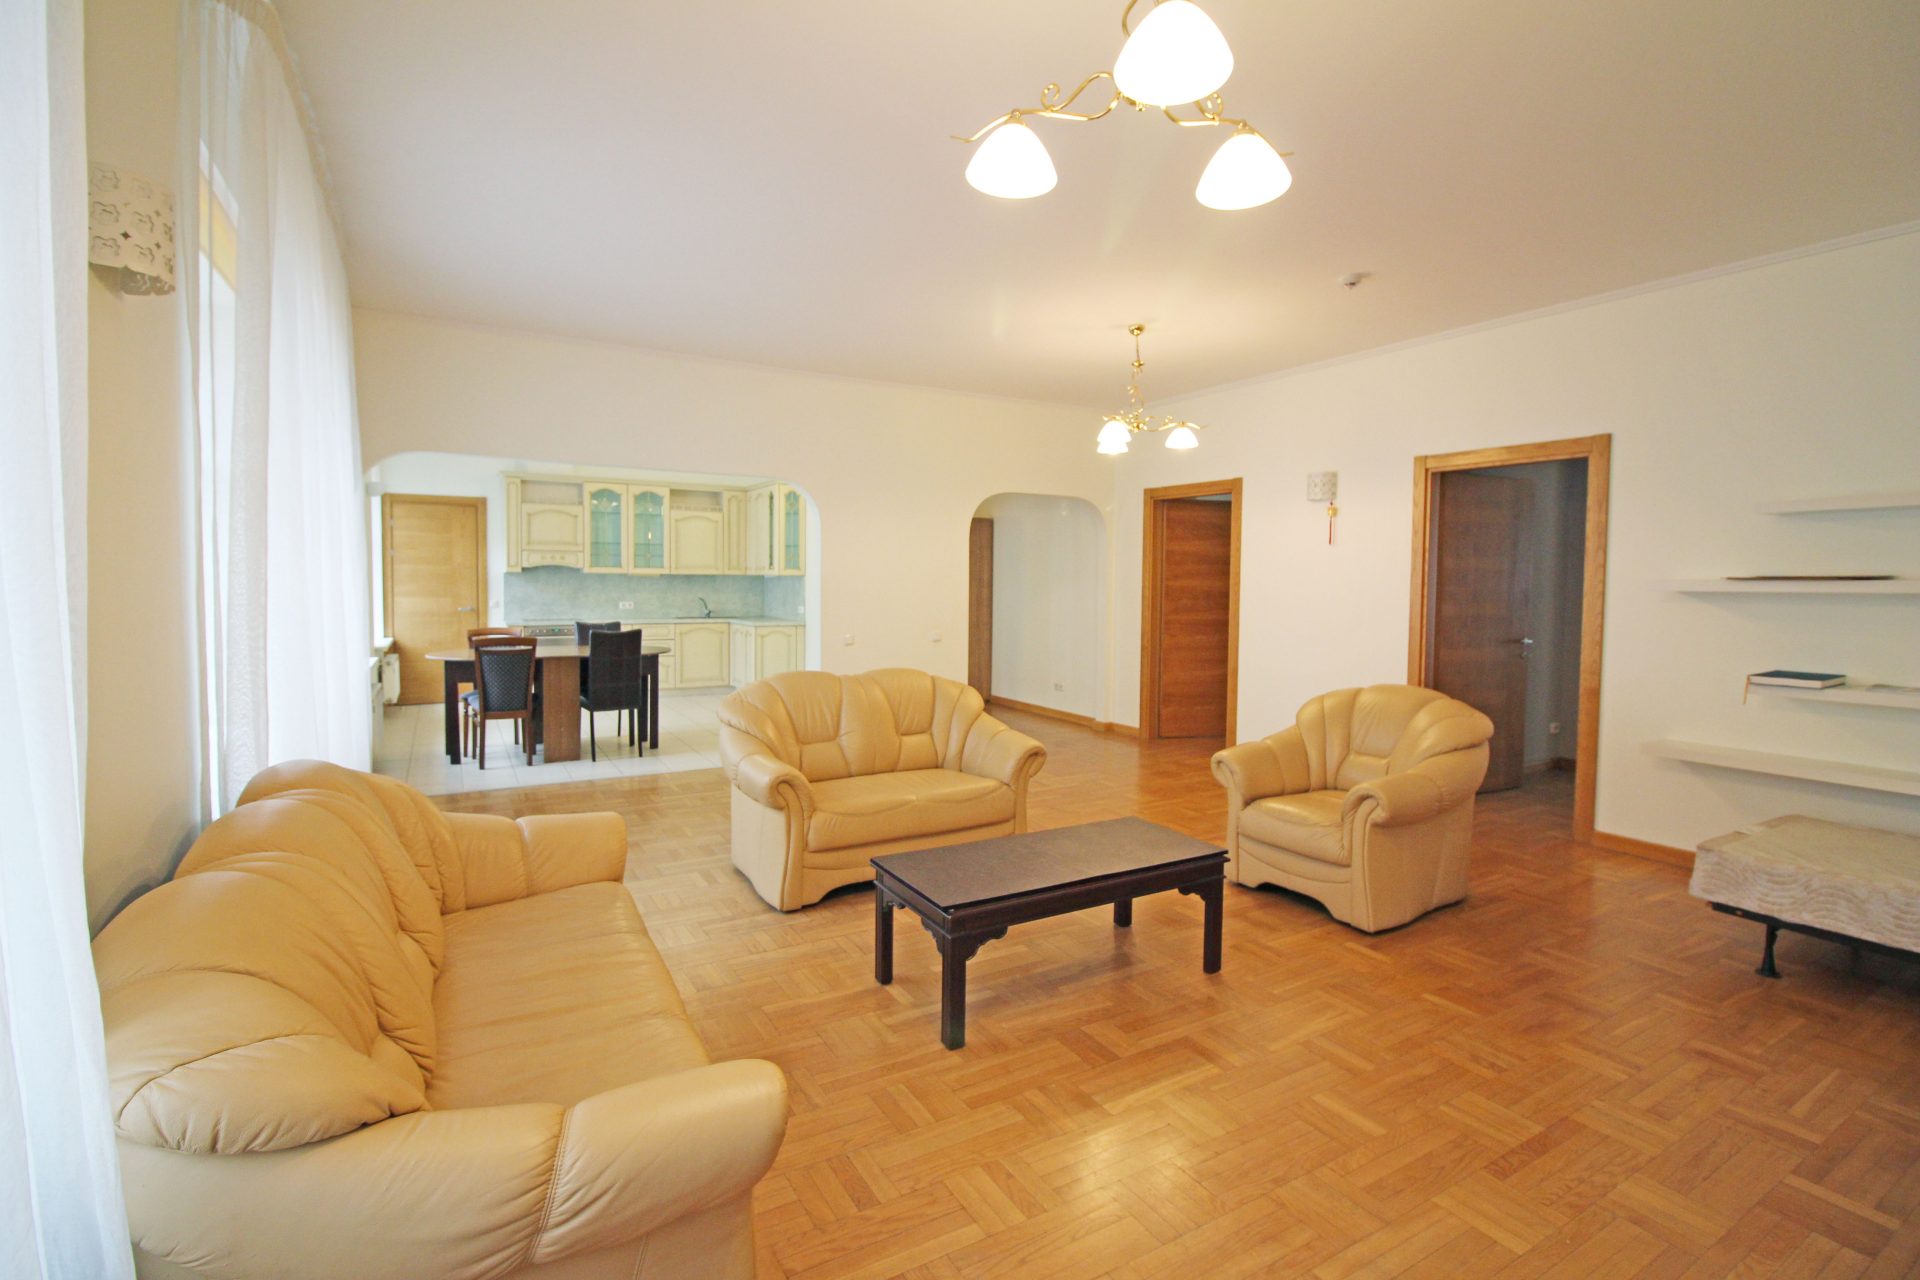 Flat for rent in a quiet city centre, on Vilandes Street N. 10-9.